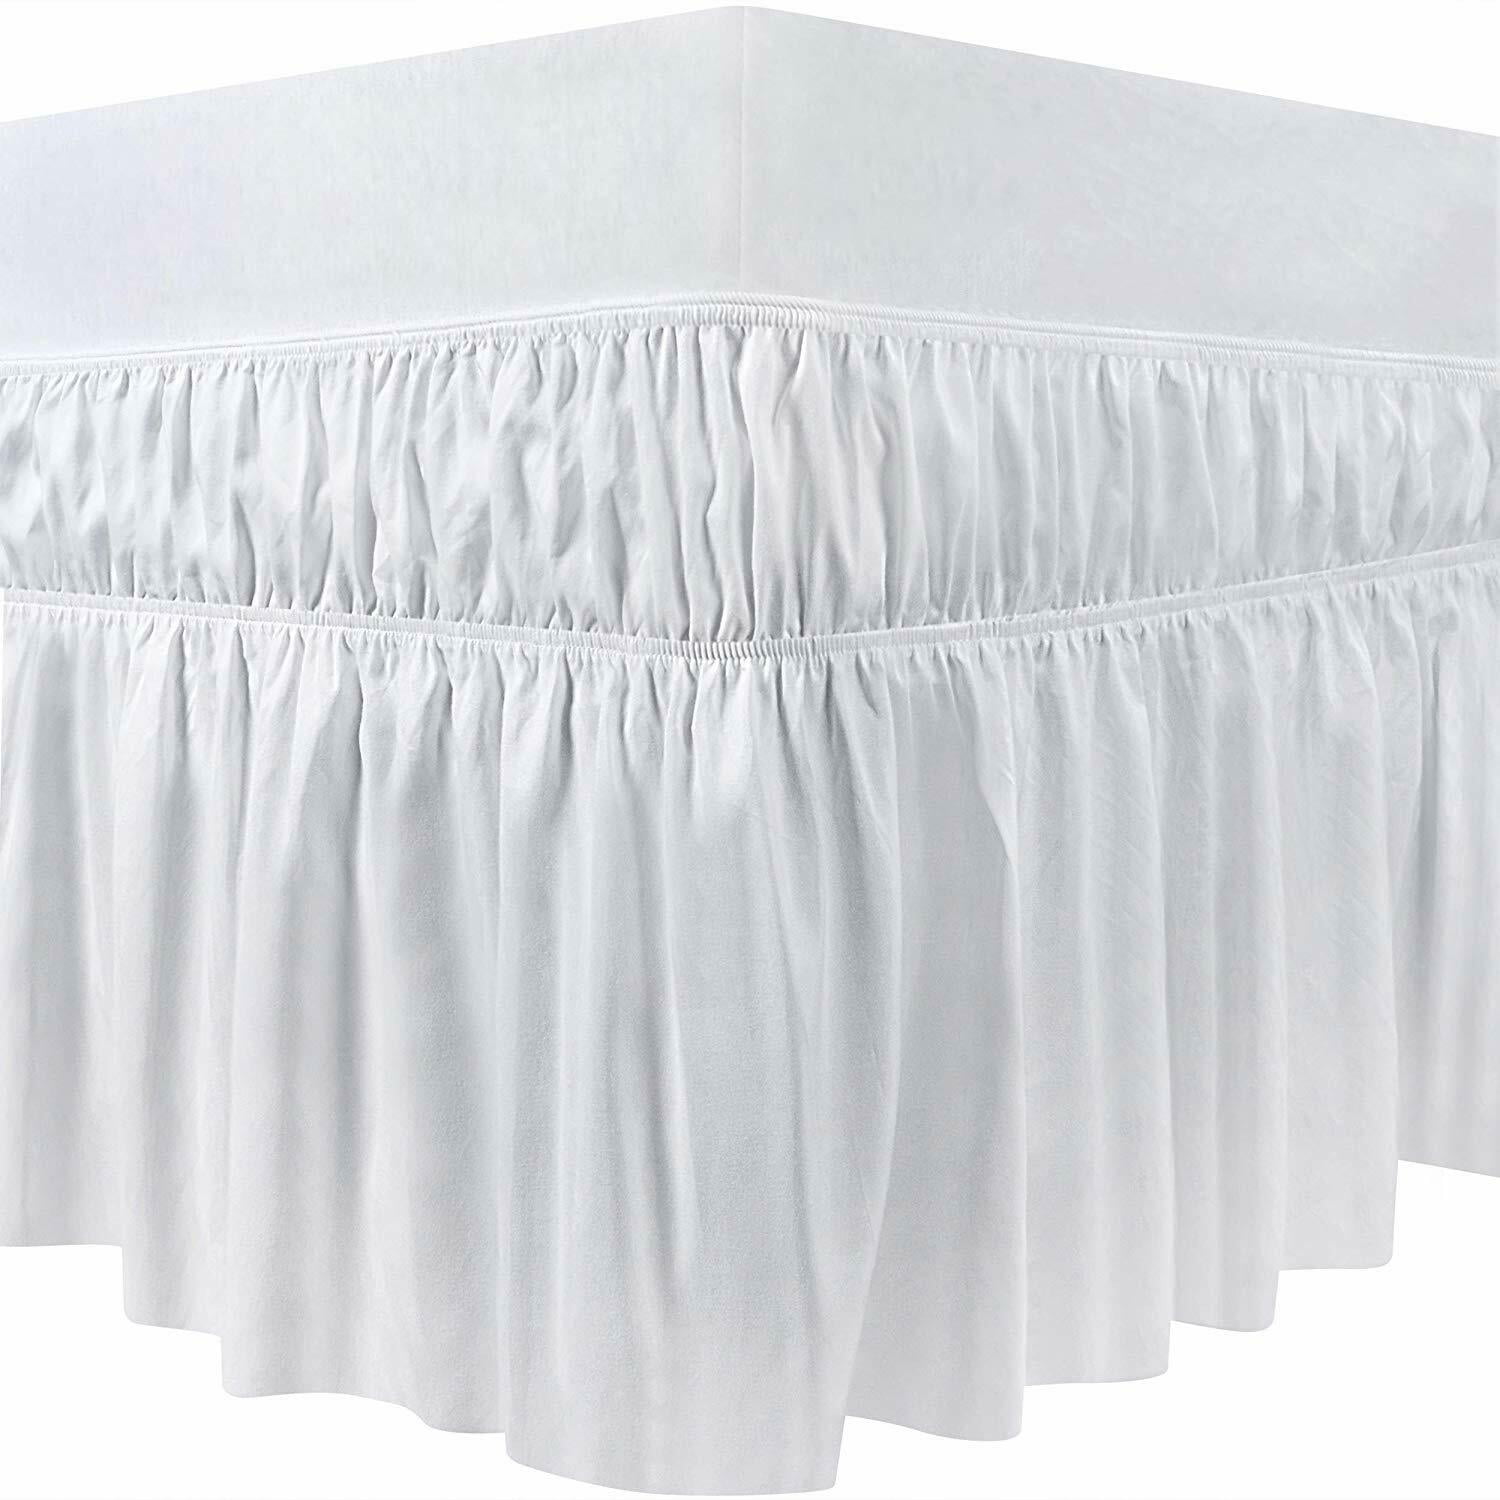 16" Drop Bed Ruffle Skirt Full Queen King Size Ultra Soft Microfiber Bed Skirts 